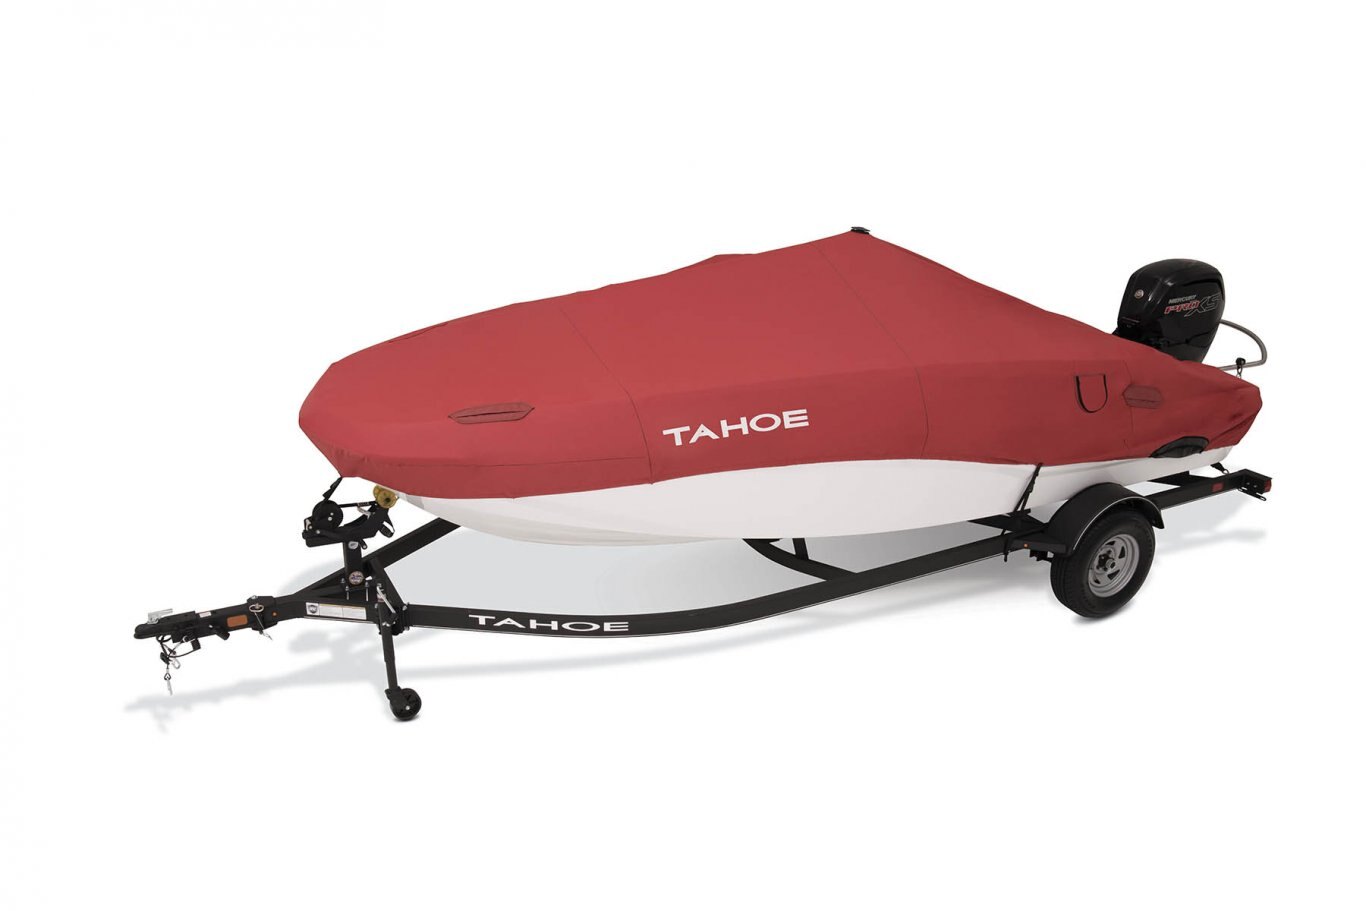 Tahoe T18 White / Red Graphics